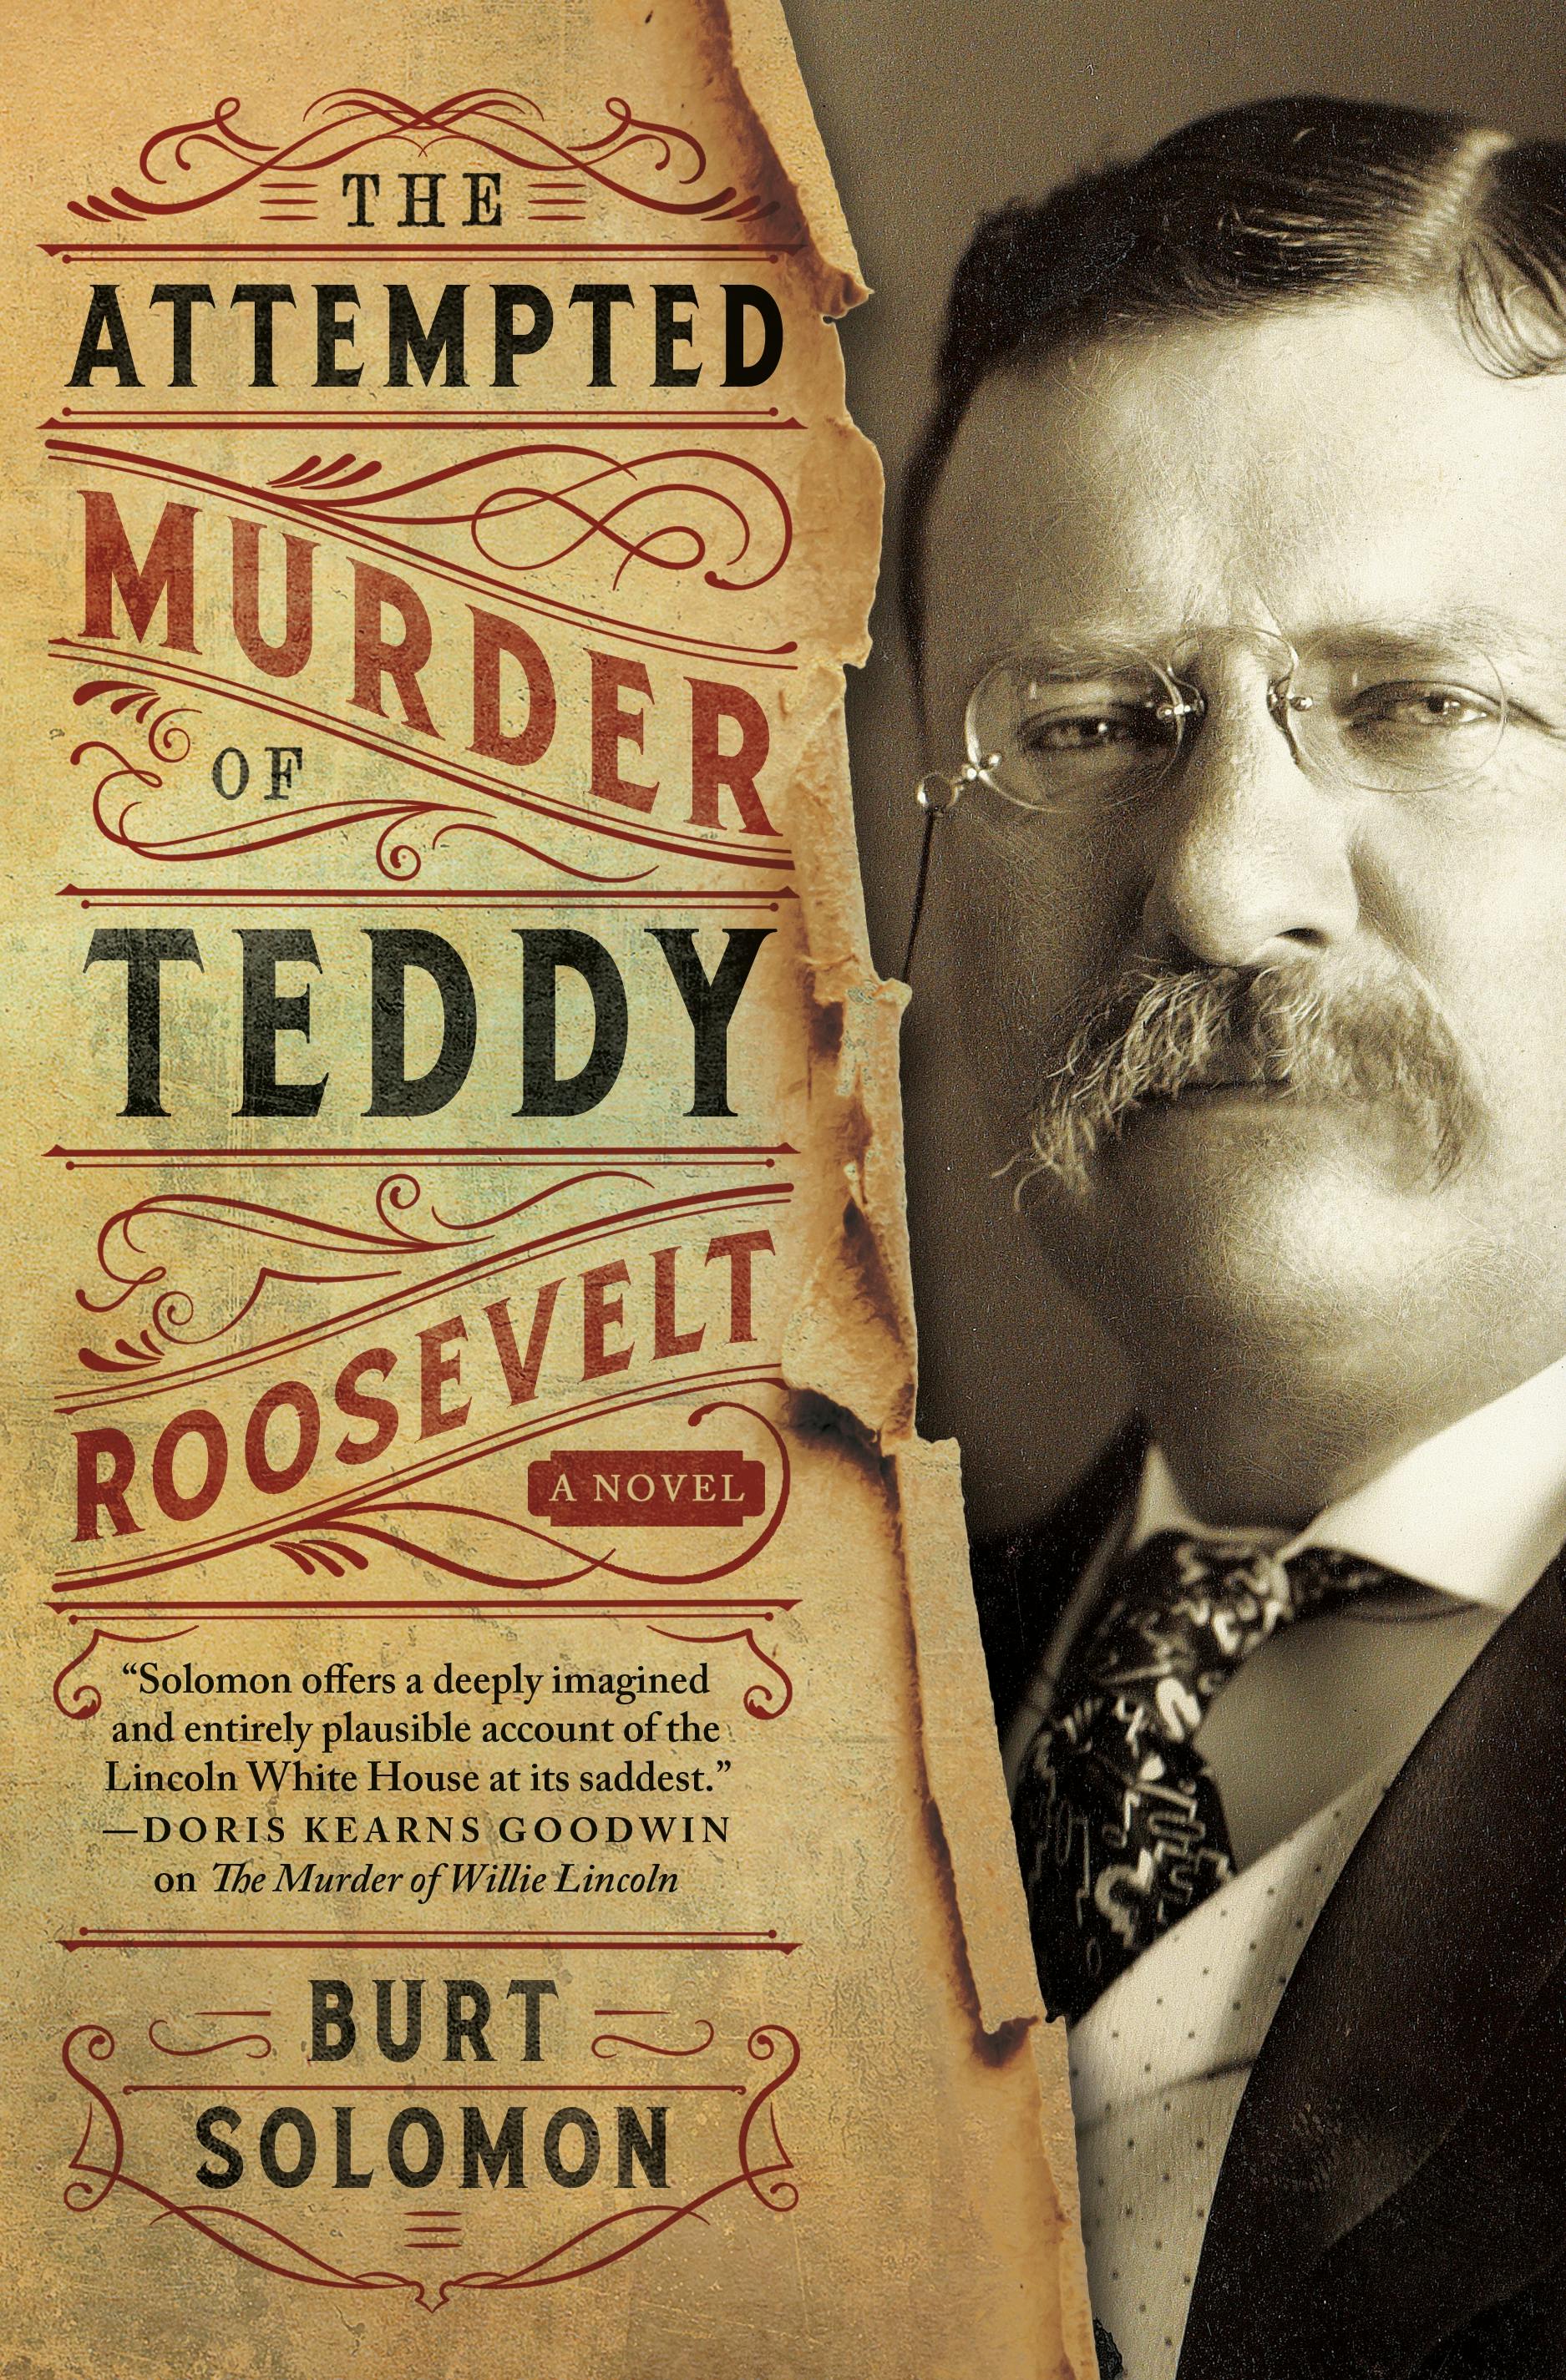 Cover for the book titled as: The Attempted Murder of Teddy Roosevelt